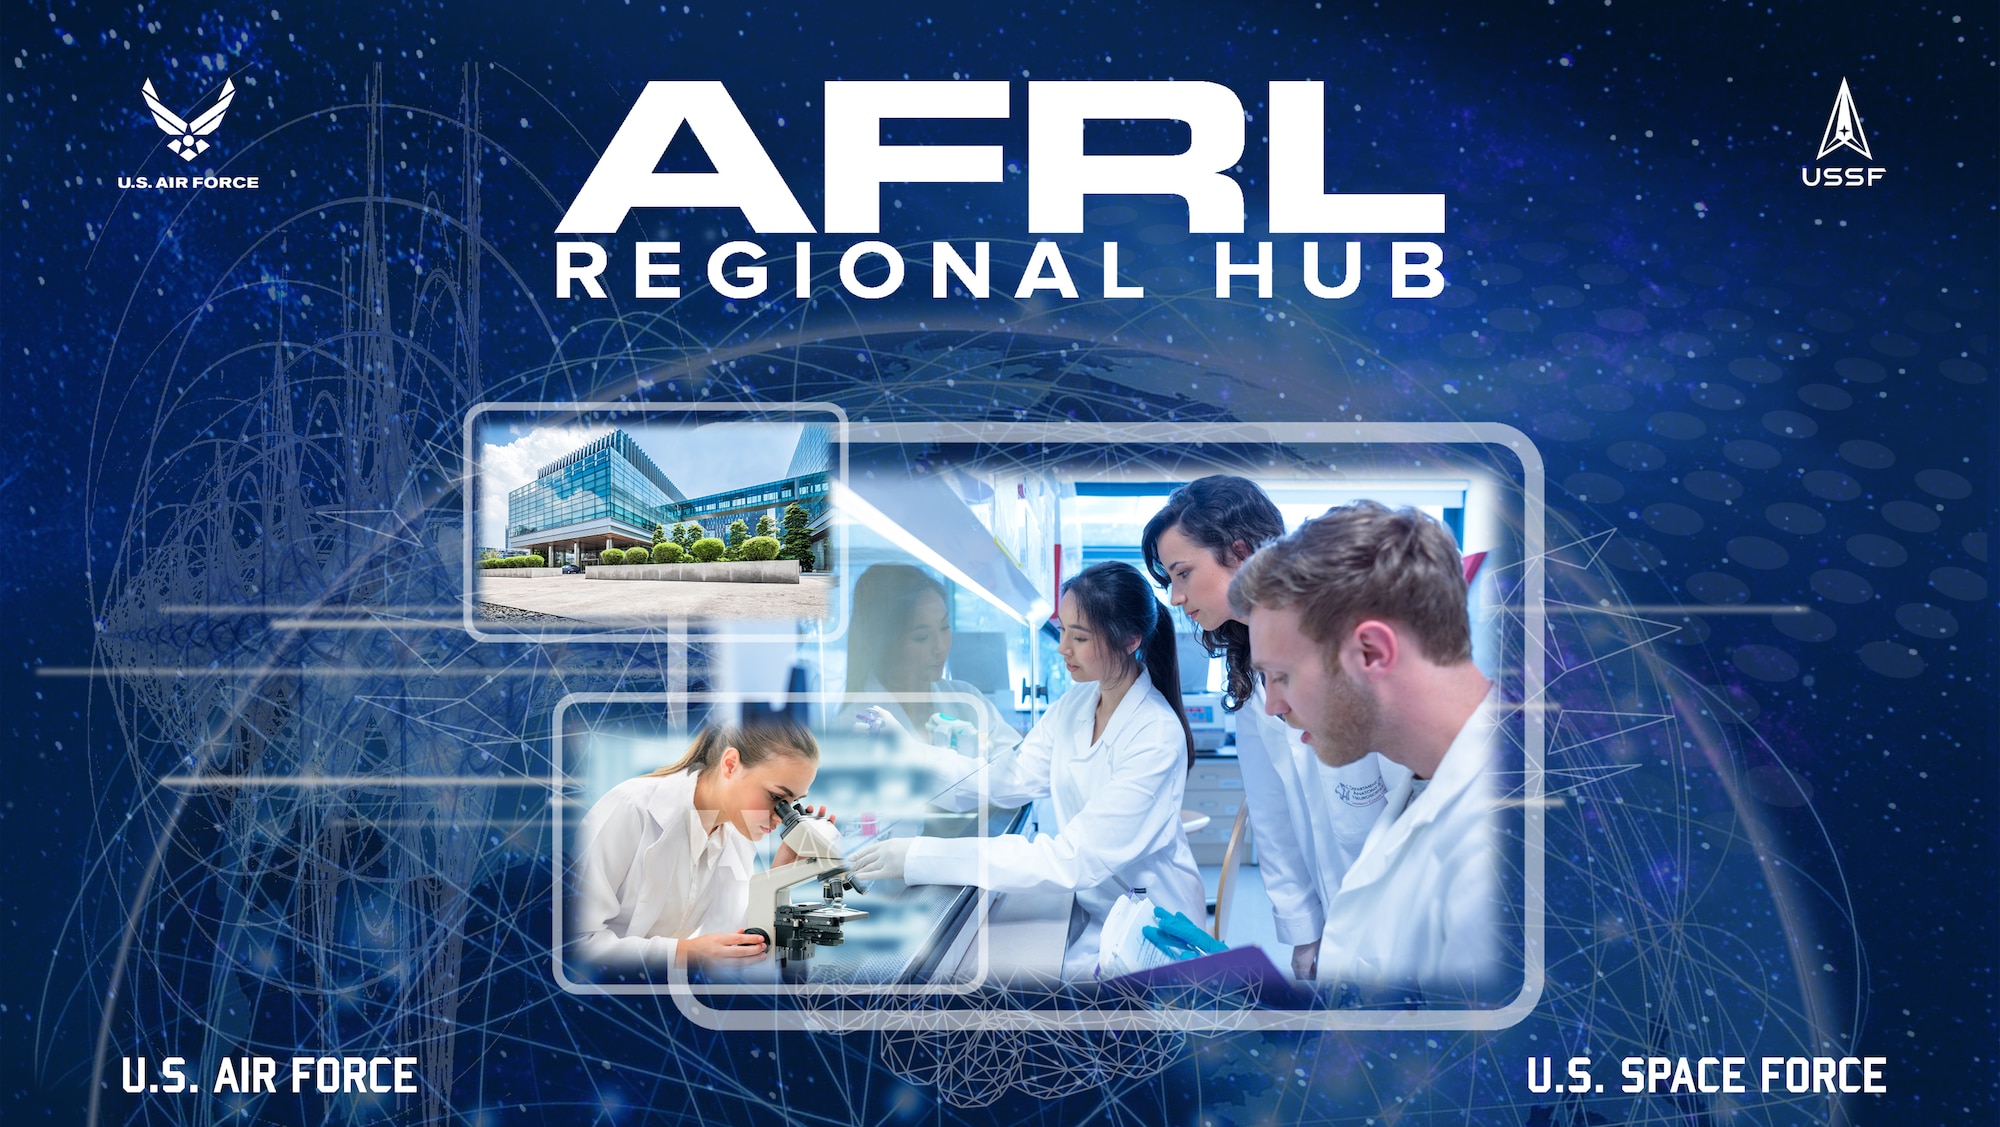 The Air Force Research Laboratory has selected two universities as partners in the creation of a new science and technology ecosystem that will also include both large and small businesses, other government agencies, and venture capitalists. The formation of the AFRL Regional Research Hub network is a pilot initiative, with the first part of the pilot covering the Mid-Atlantic and Midwest regions, with expansion to other regions possible in the future. AFRL will partner with Cornell University in Ithaca, New York, to lead the AFRL Regional Research Hub – Mid-Atlantic, and Purdue University in West Lafayette, Indiana to lead the AFRL Regional Research Hub – Midwest. (U.S. Air Force illustration/Randy Palmer)